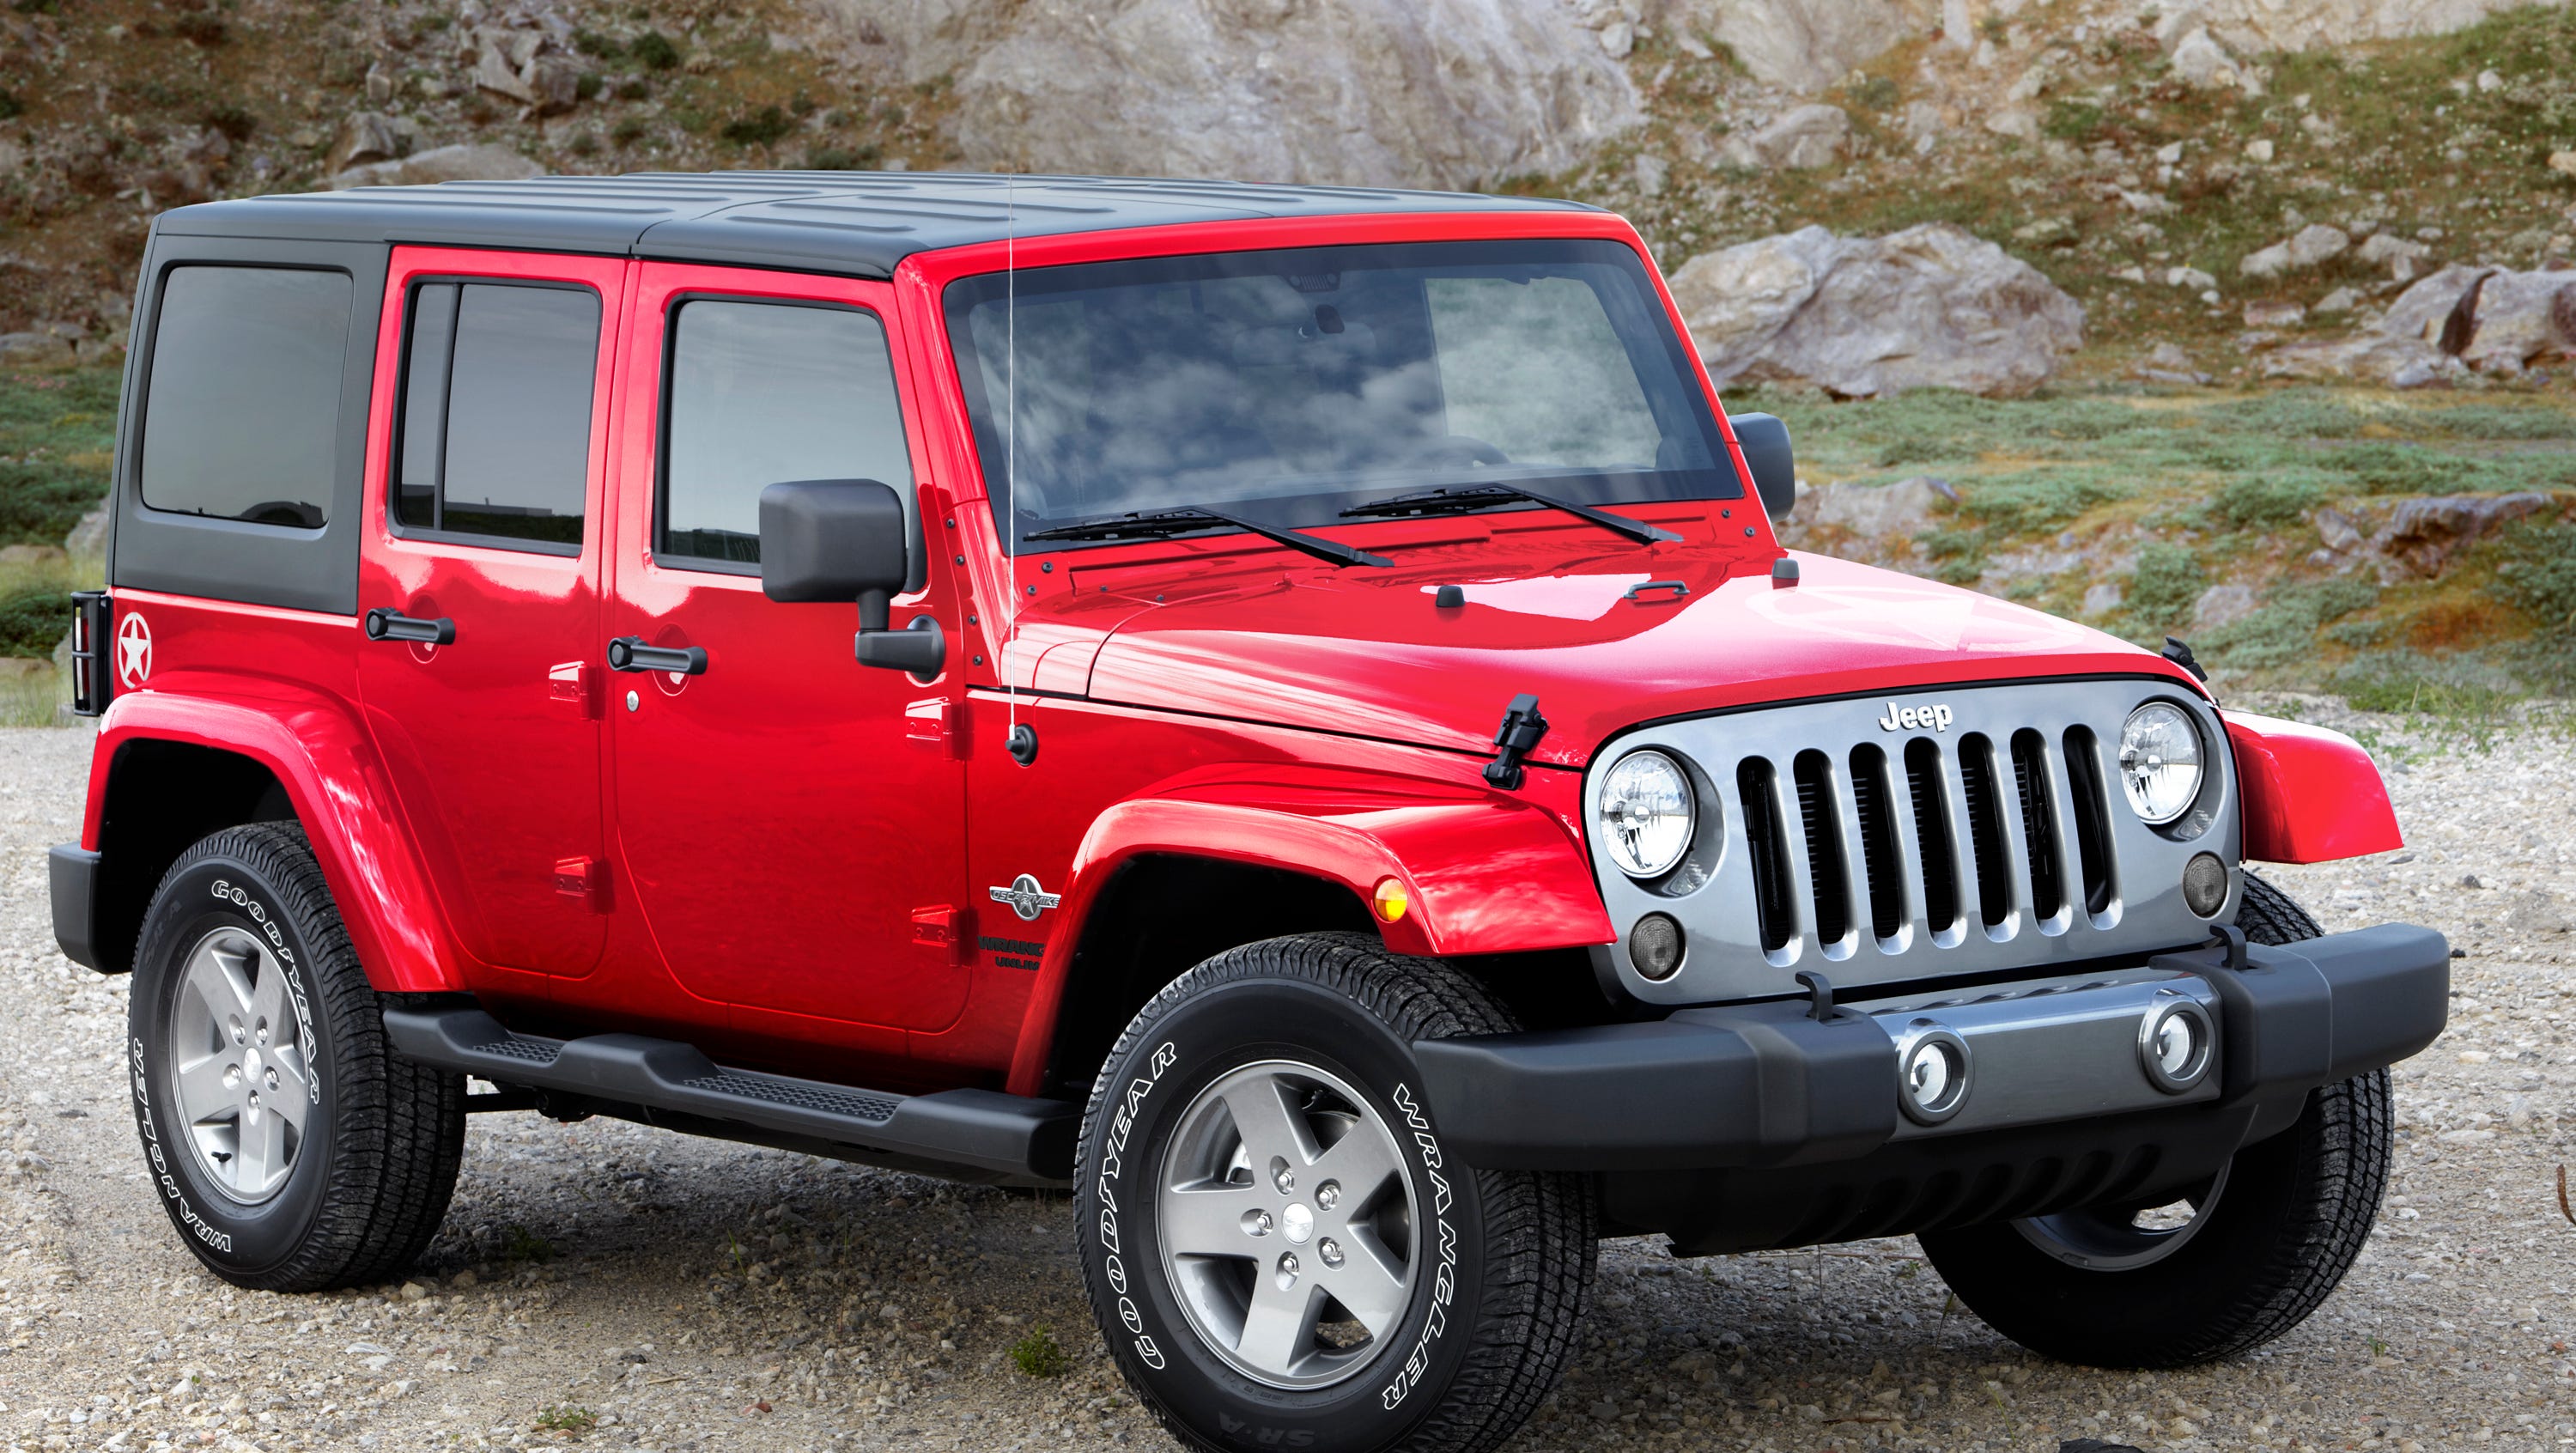 Auto review: 2014 Jeep Wrangler Unlimited is a convertible family car